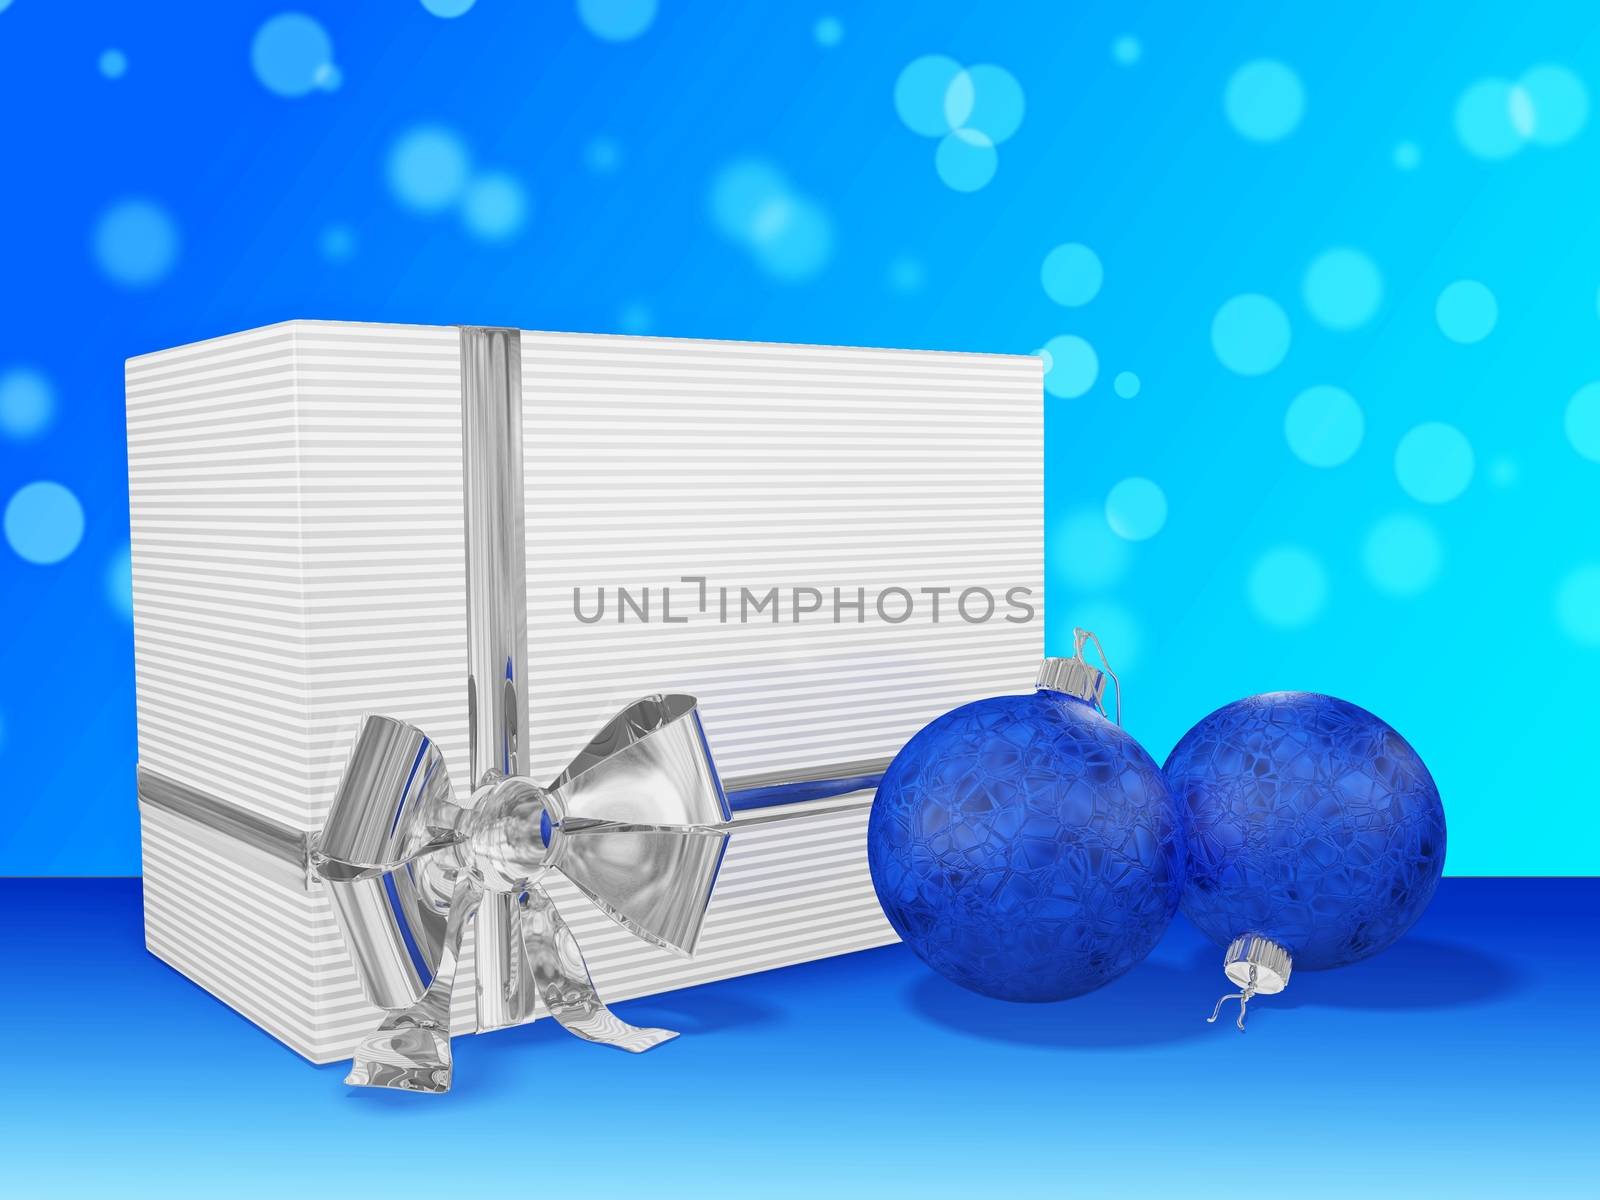 This is a 3D illustration of a striped Christmas gift with a silver ribbon and bow, and blue bauble balls against a bokeh background. It is ideal for festival, celebration, holiday, gifting, Christmas and new year concepts.
